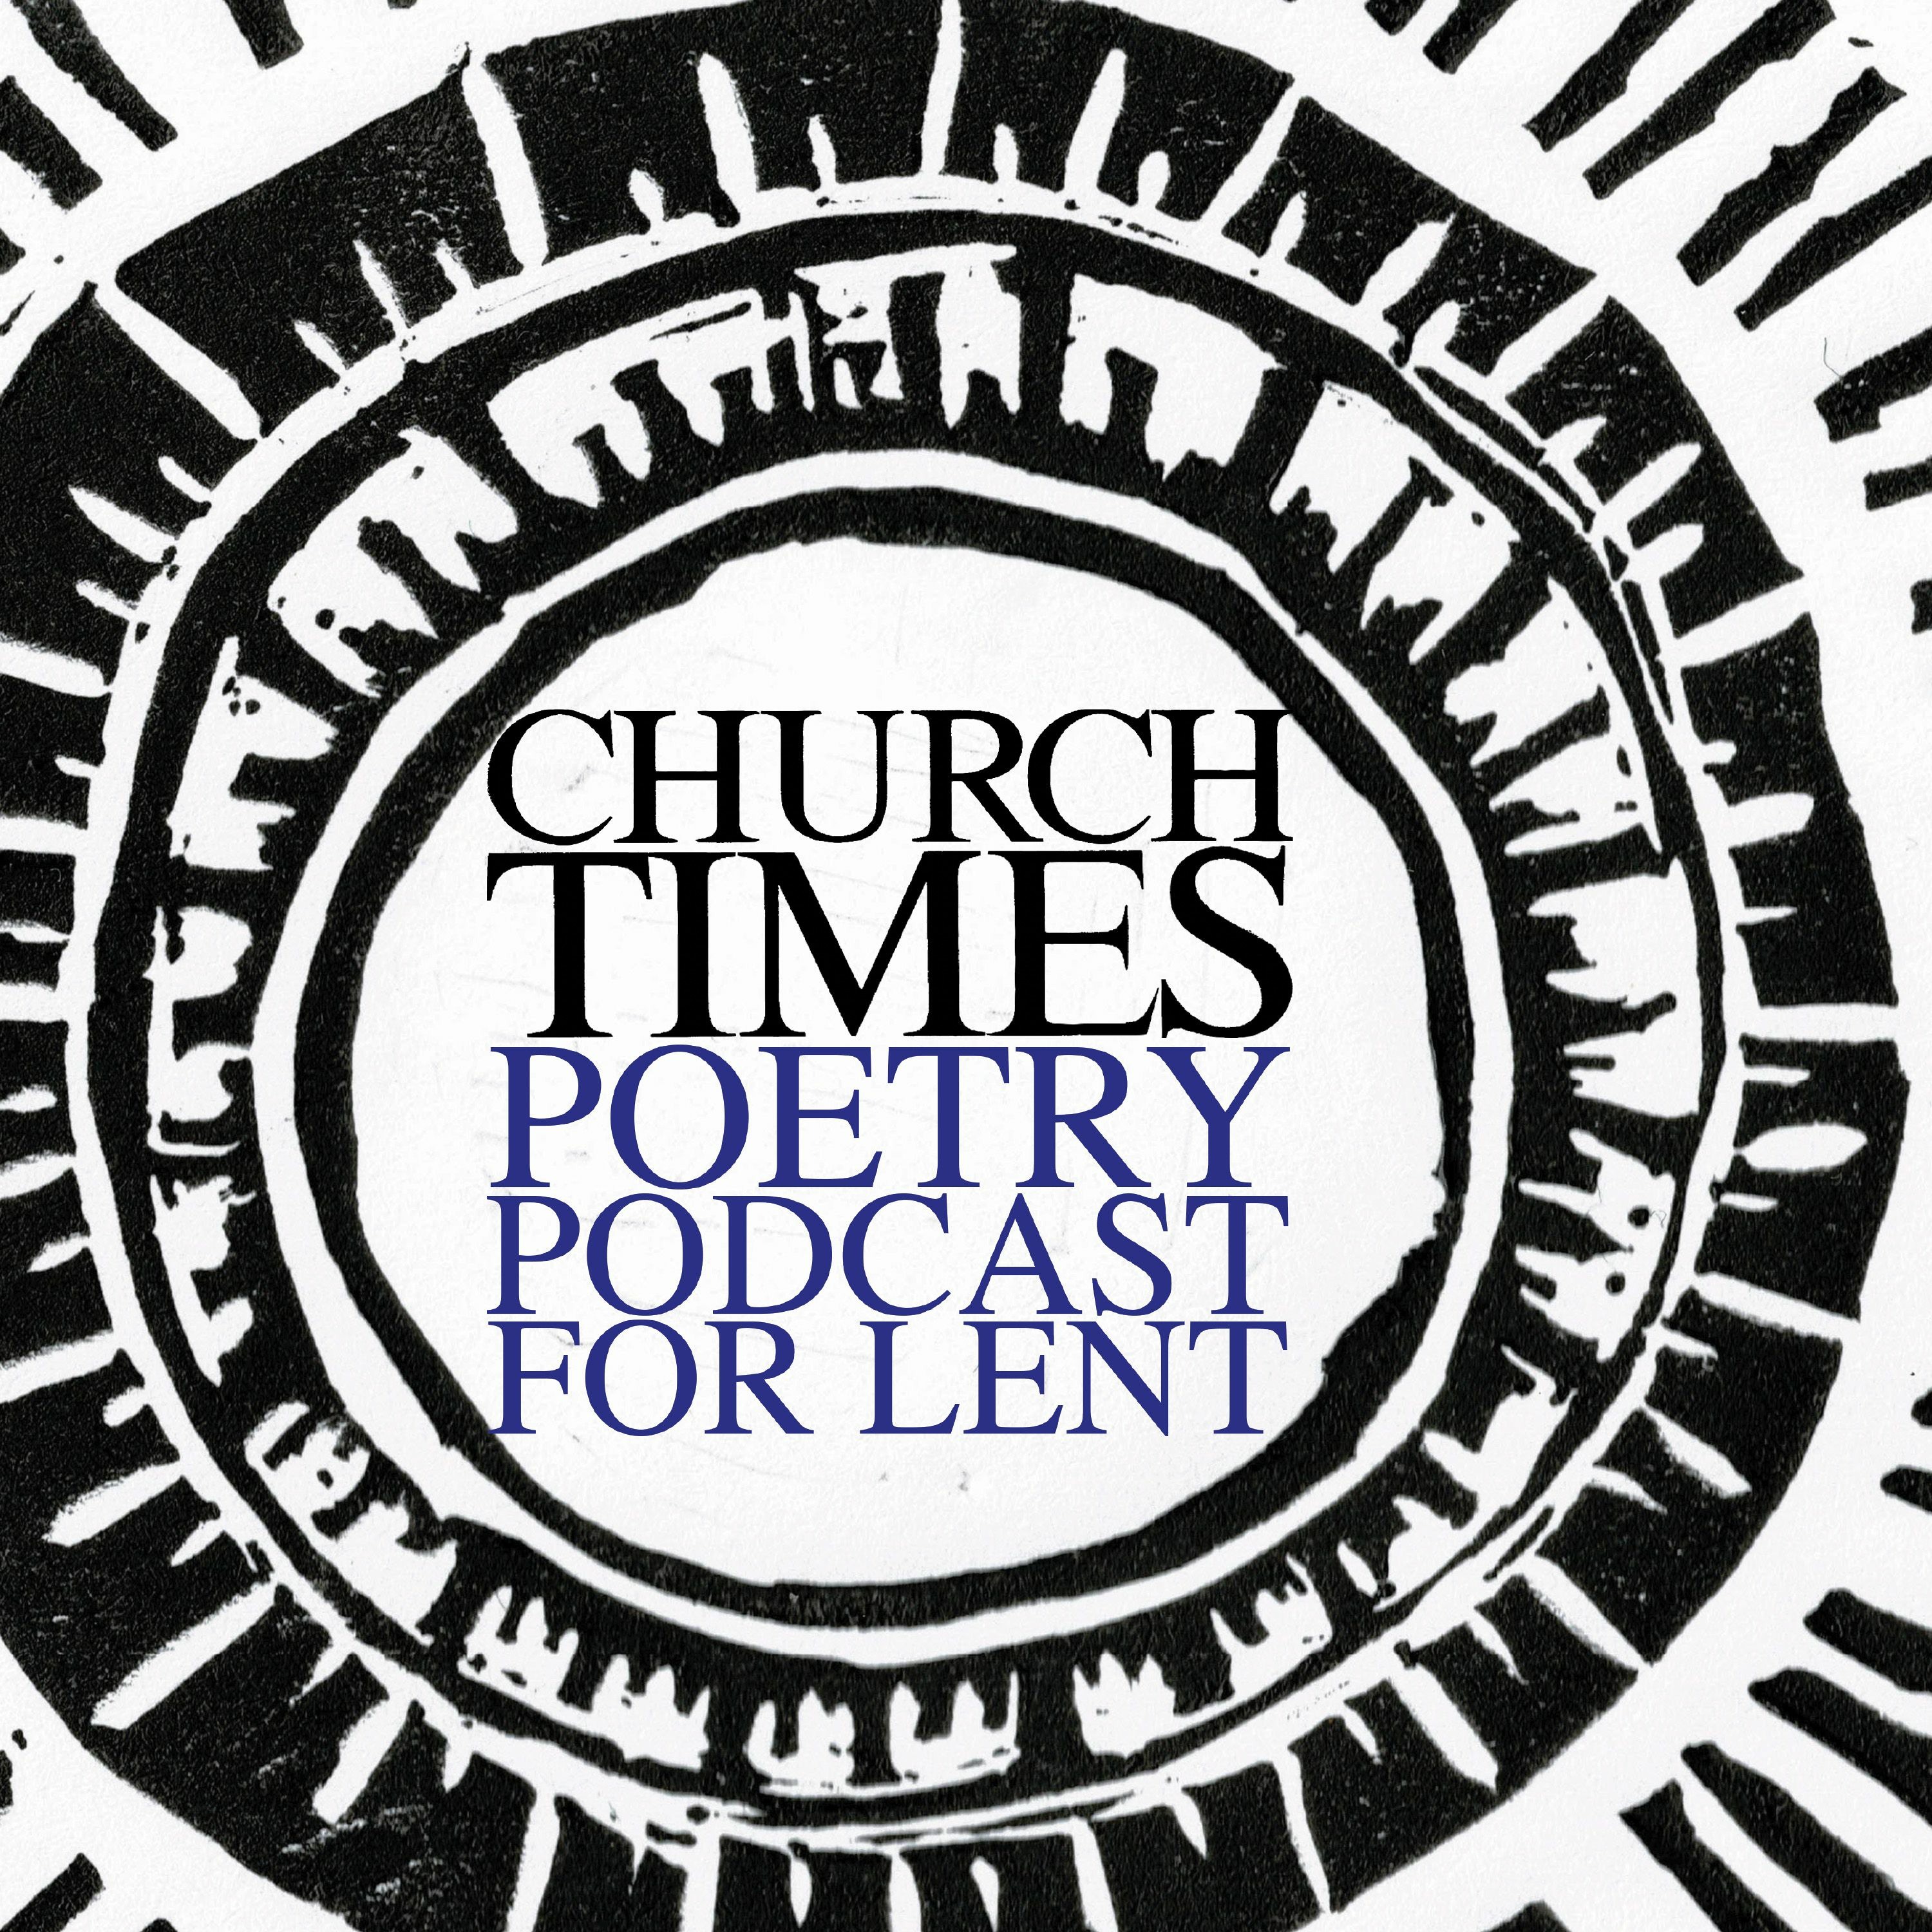 Lent Poetry Podcast revisited: Mark Oakley on ‘Love (III)’ by George Herbert